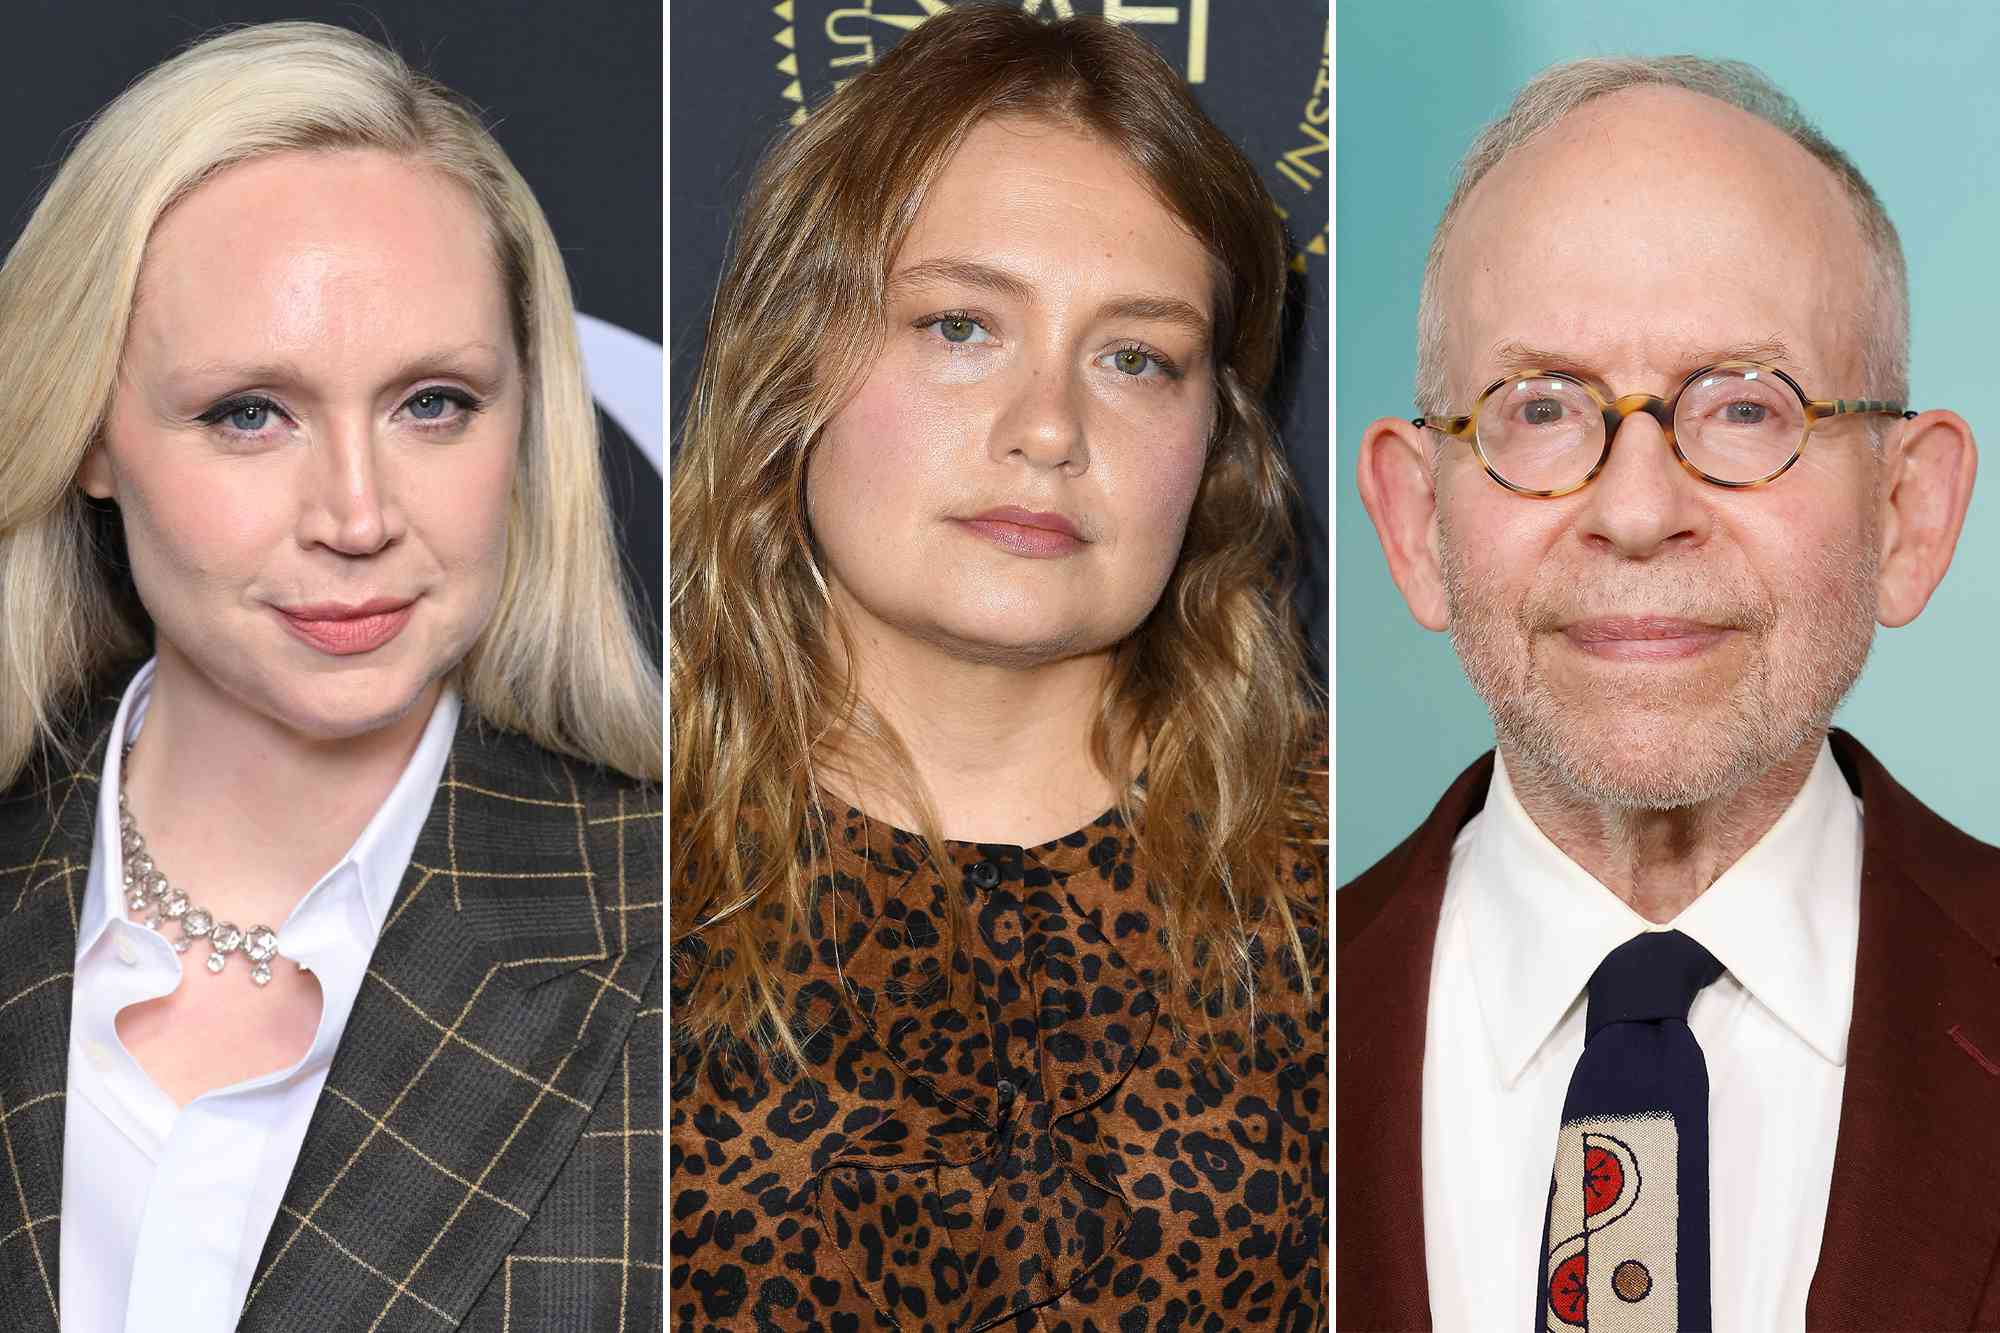 Gwendoline Christie attends the Dior Homme Menswear Fall-Winter 2023-2024 show as part of Paris Fashion Week on January 20, 2023. ; Merritt Wever attends the 20th Annual AFI Awards on January 03, 2020 in Los Angeles, California. ; Bob Balaban attends the New York premiere of "Asteroid City" on June 13, 2023 in New York City. 